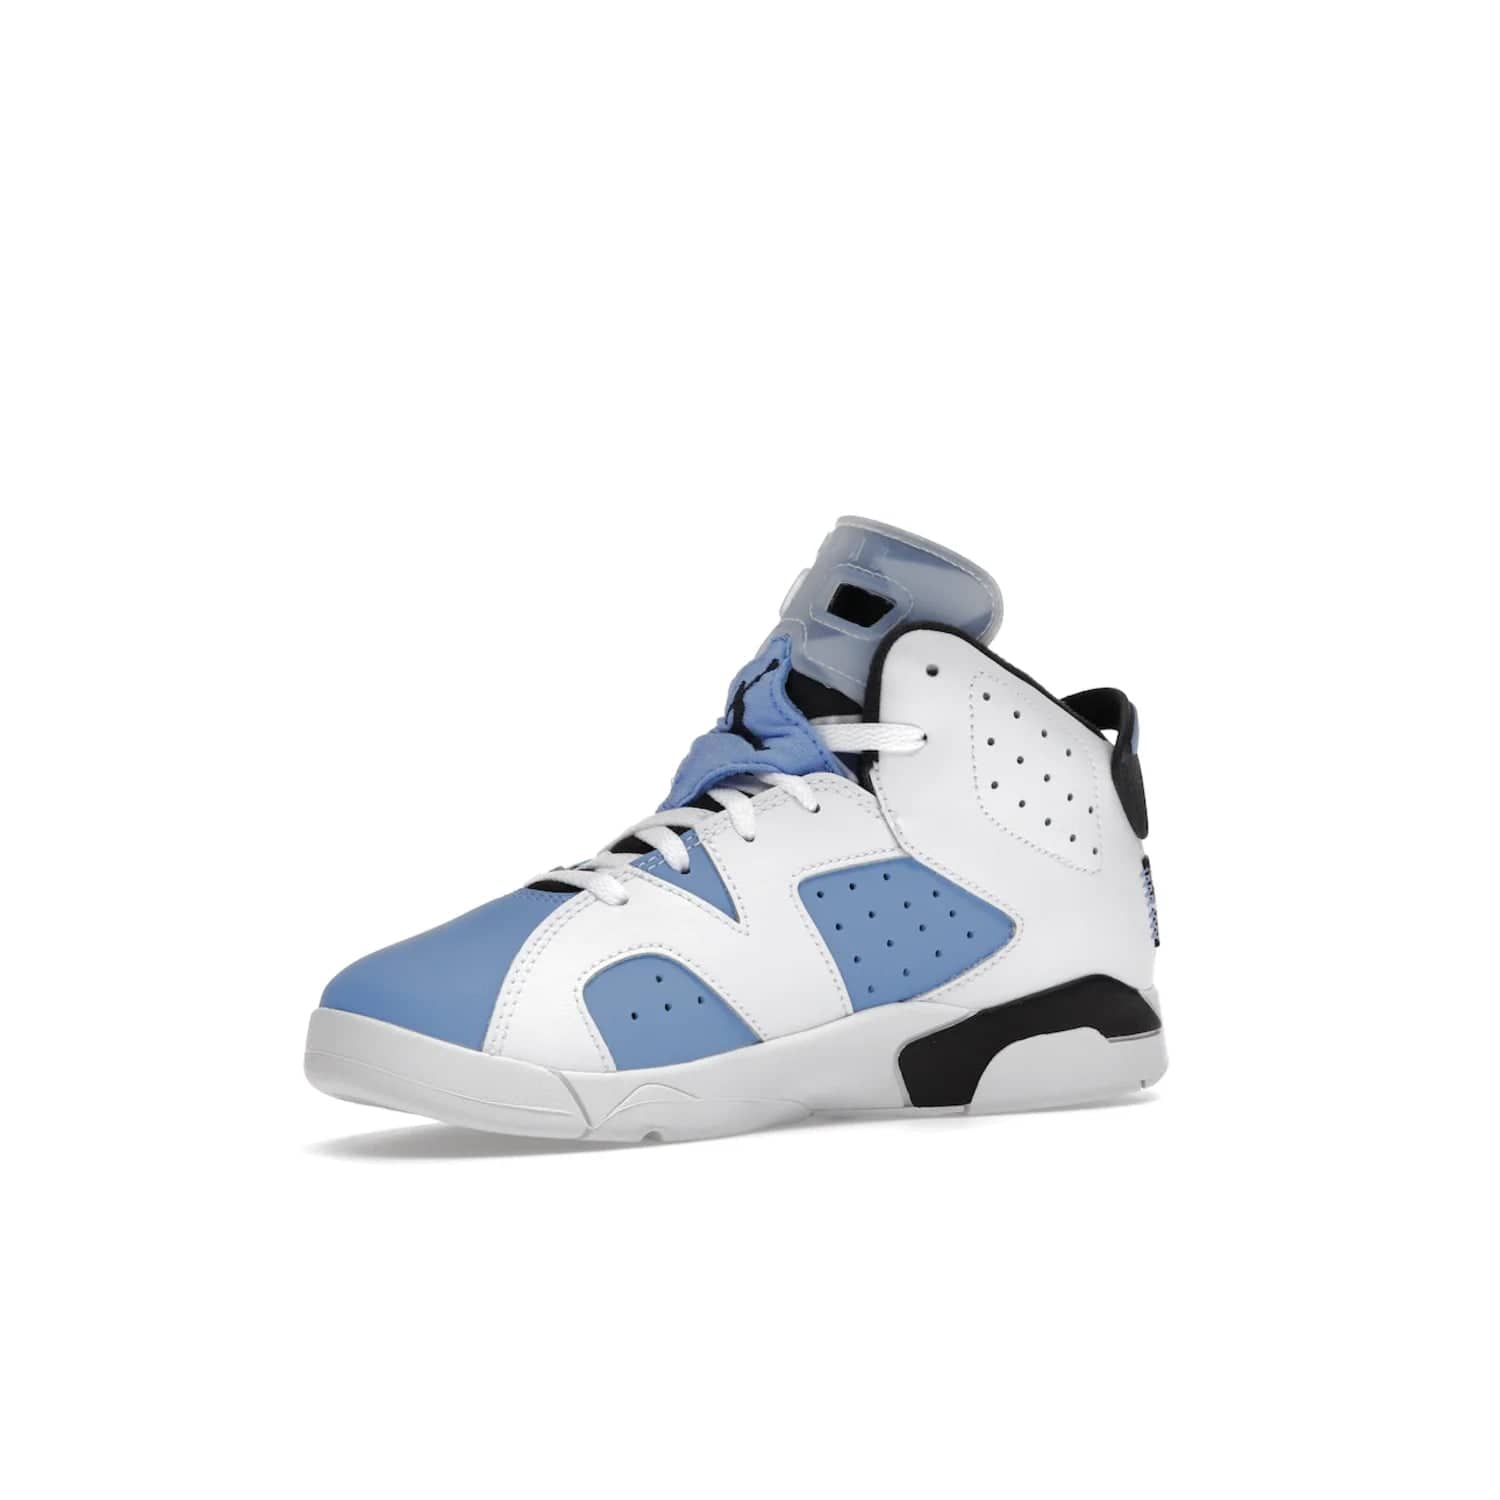 Jordan 6 Retro UNC White (PS) - Image 16 - Only at www.BallersClubKickz.com - The Air Jordan 6 Retro UNC White PS celebrates Michael Jordan's alma mater, the University of North Carolina. It features a classic color-blocking of the iconic Jordan 6 Carmine and a stitched Jordan Team patch. This must-have sneaker released on April 27th, 2022. Referencing the university colors, get this shoe for a stylish and timeless style with university pride.